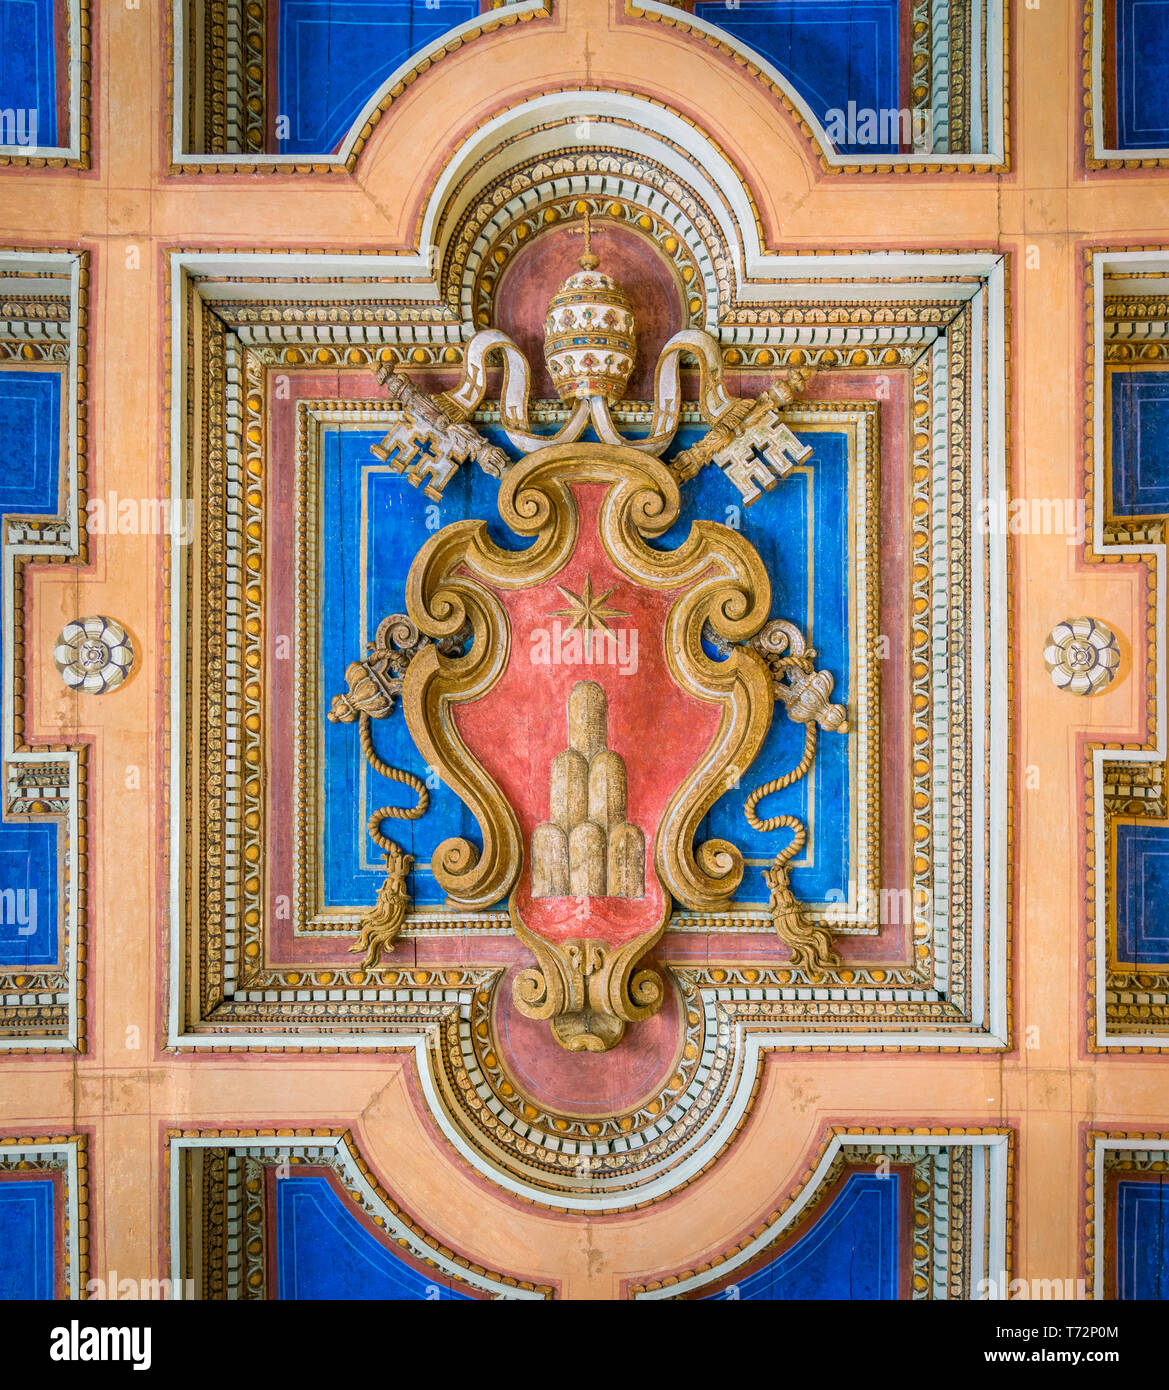 Papal coat of arms in the ceiling of the Capitoline Museums in Rome, Italy. Stock Photo